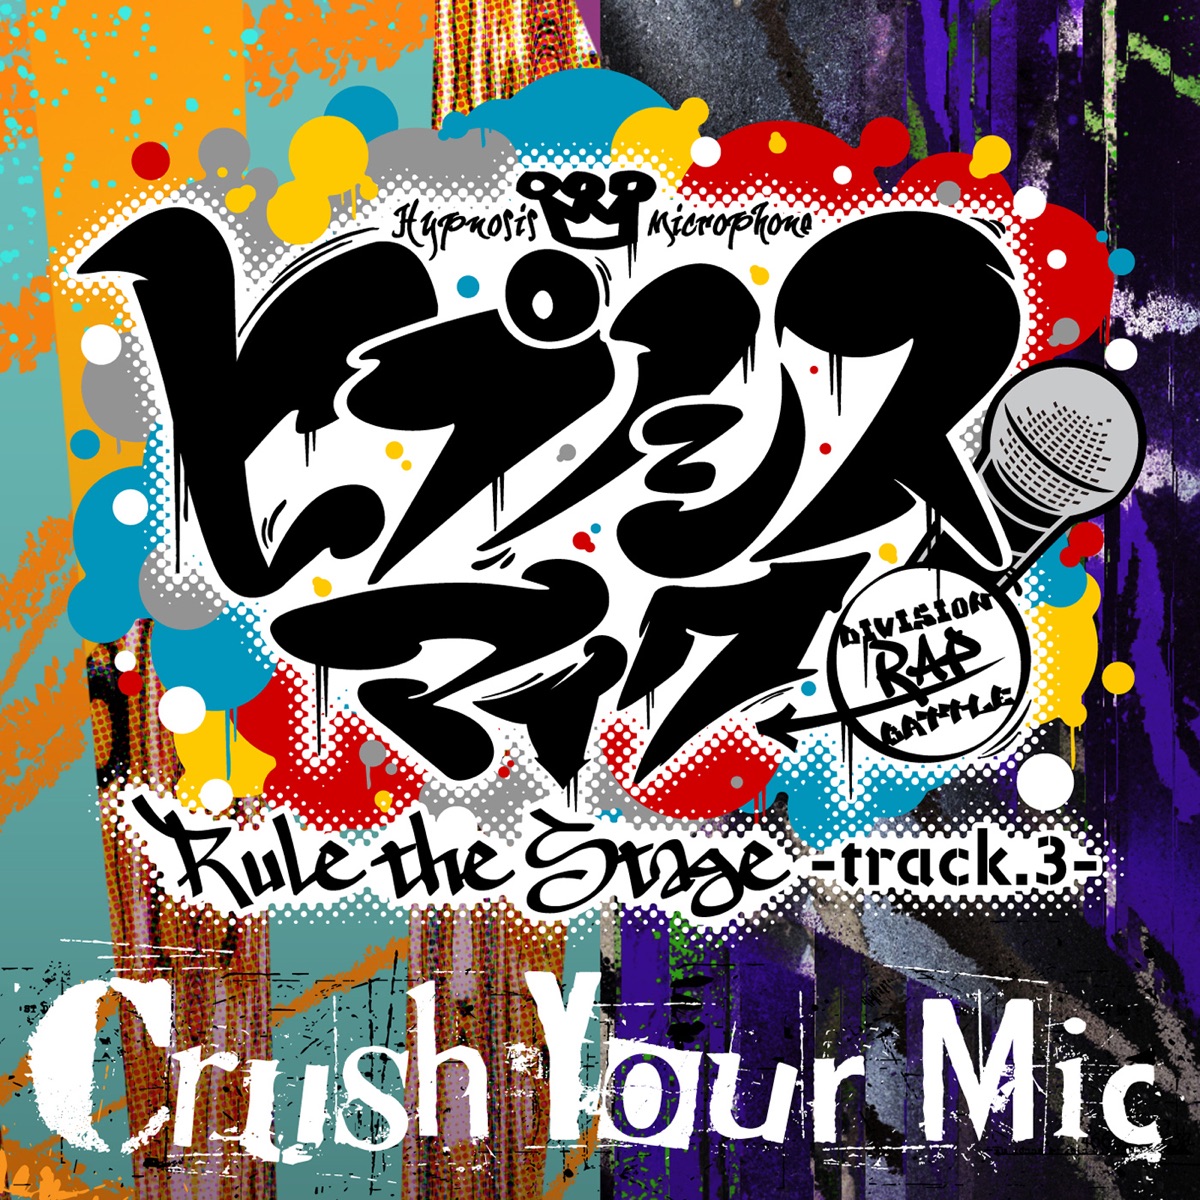 Cover for『Hypnosis Mic -Division Rap Battle- Rule the Stage (Dotsuitare Honpo・Bad Ass Temple) - Crush Your Mic -Rule the Stage track.3-』from the release『Crush Your Mic -Rule the Stage track.3-』